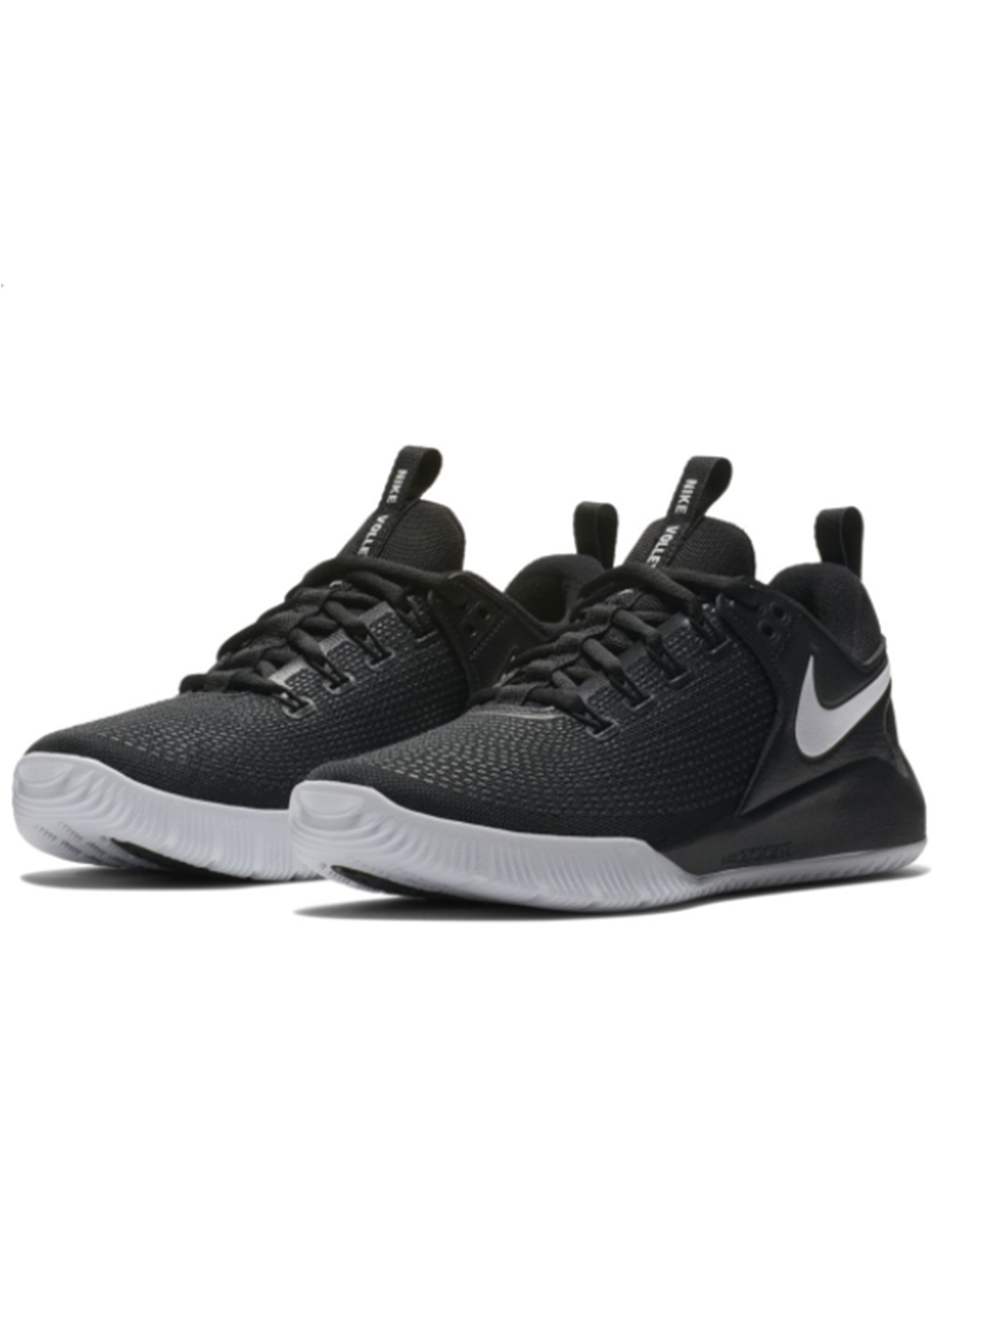 Women's Nike Zoom HyperAce 2 Shoes - Black/White | Midwest Volleyball Warehouse